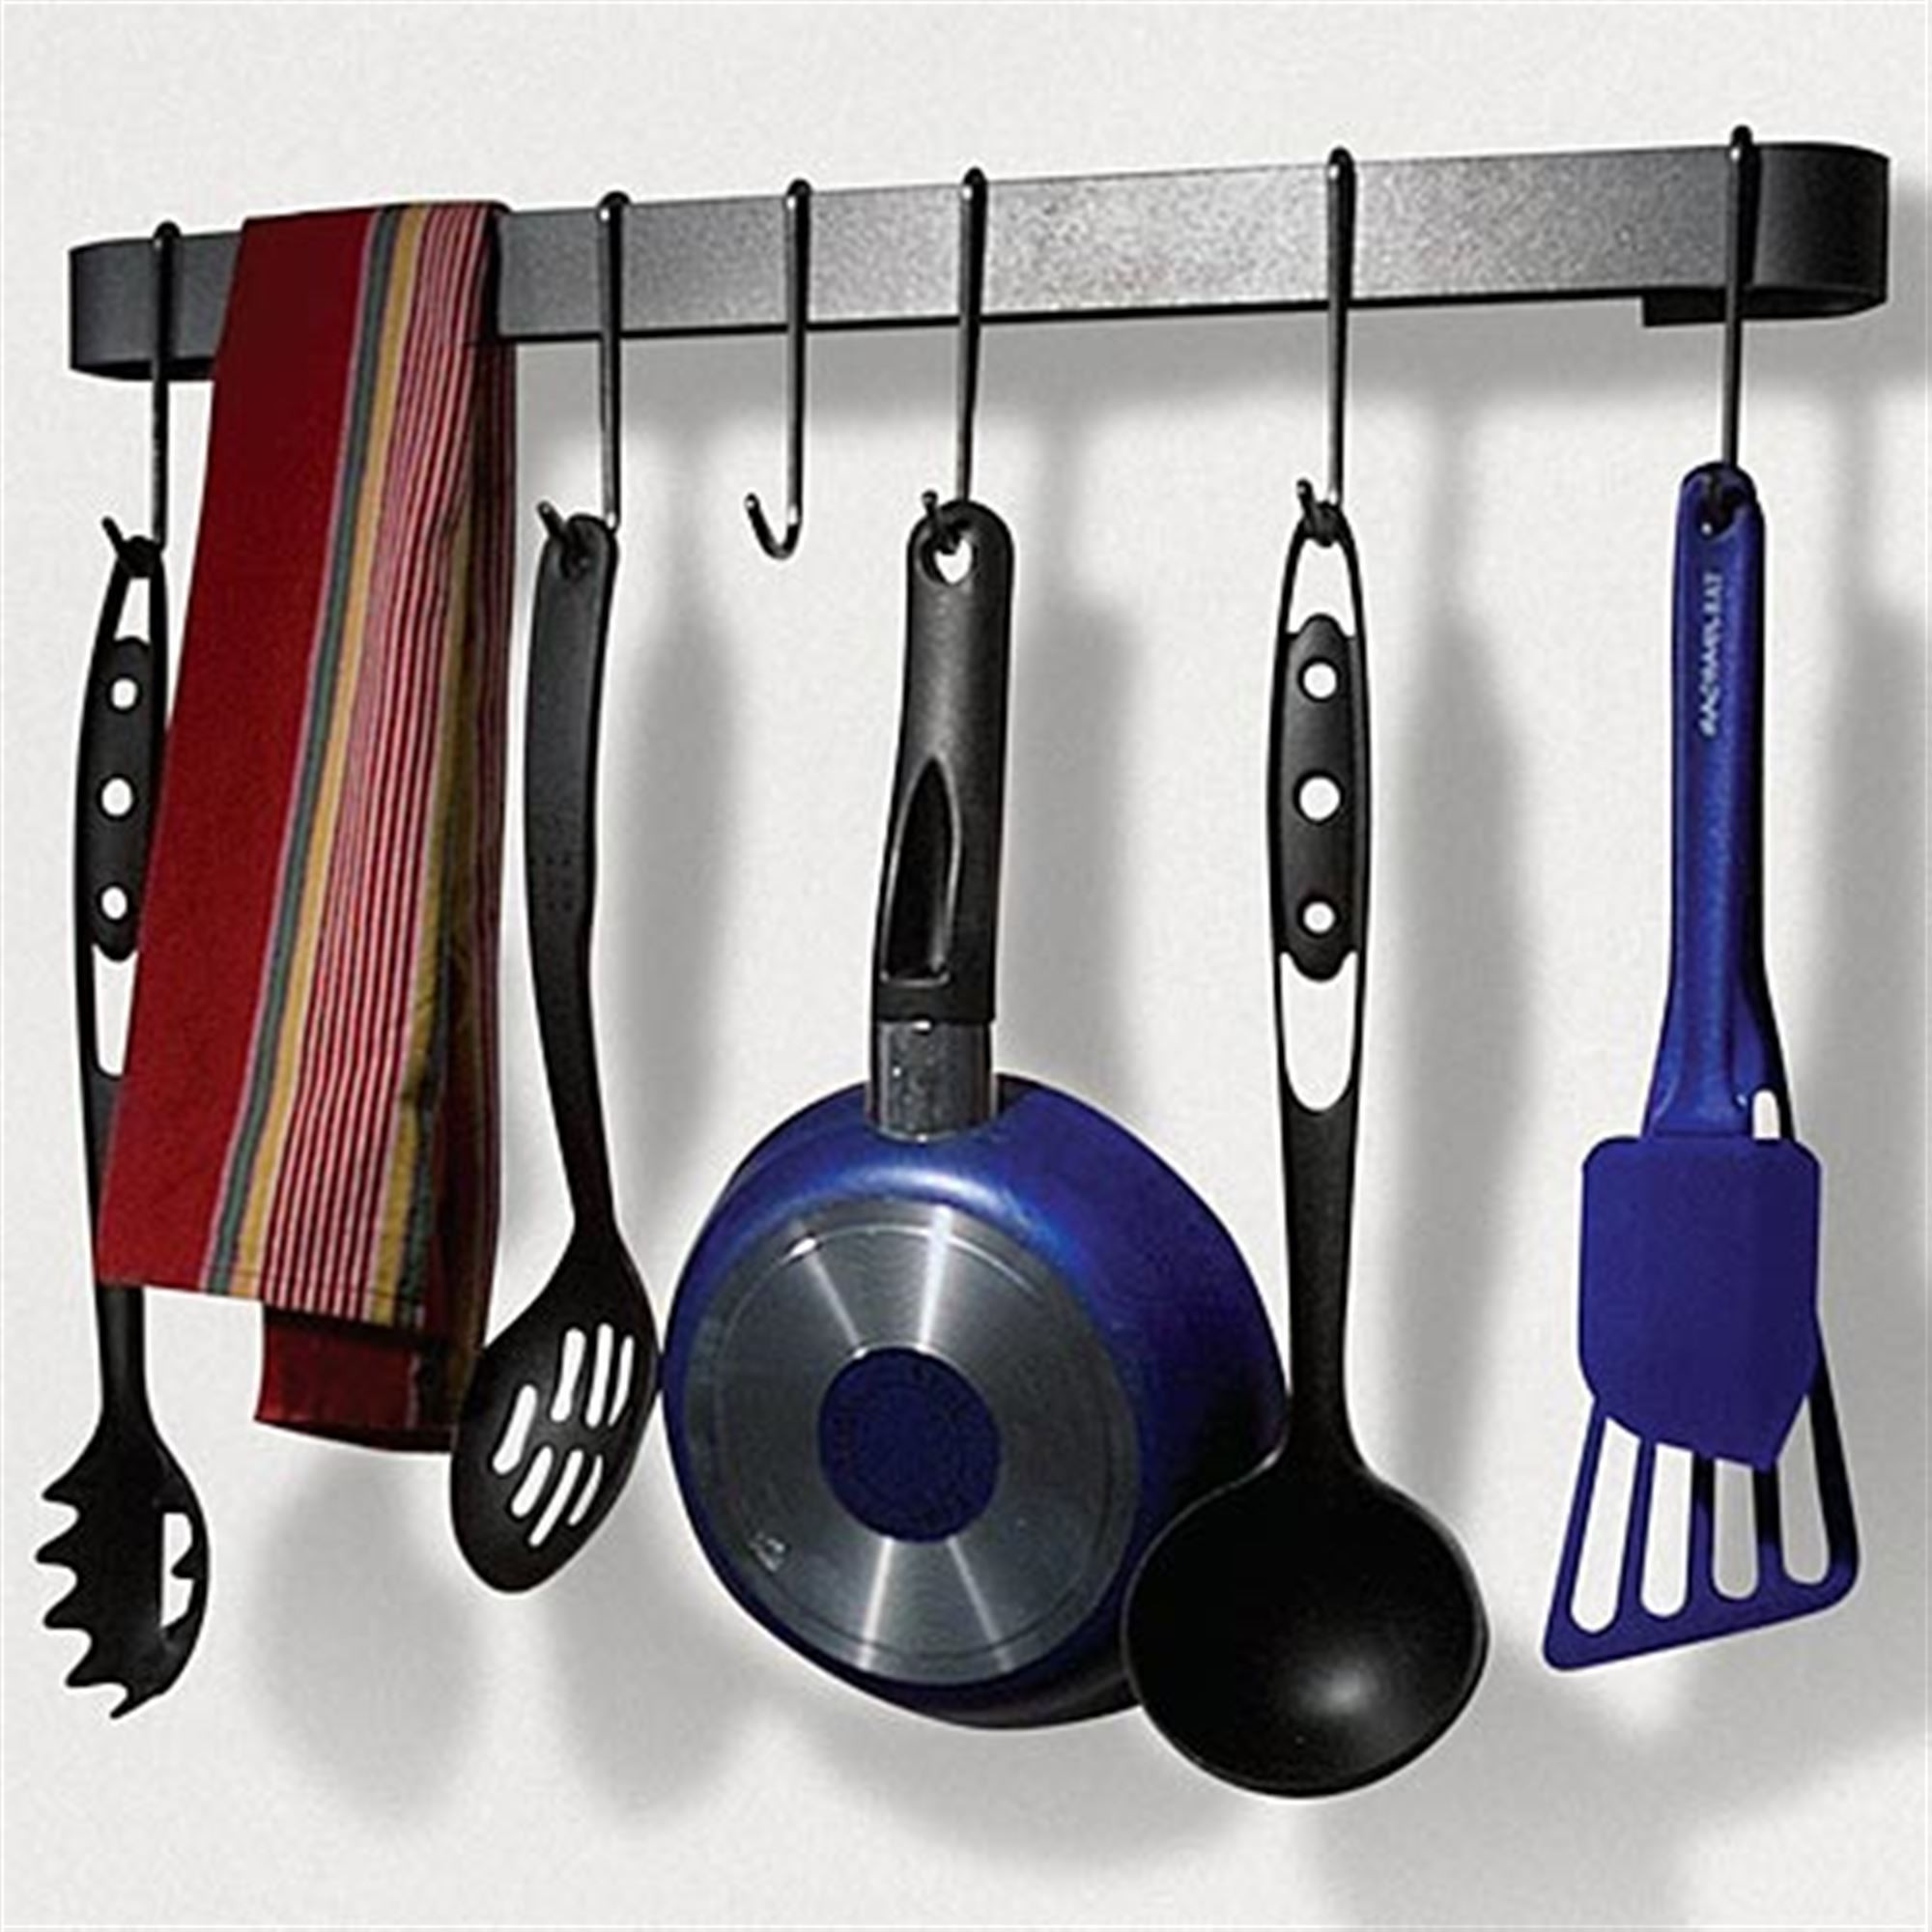 The Utensil Bar Rack from Sturbridge Yankee Workshop comes with eight pot hooks and is crafted in hot rolled steel with a uniform satin finish. 4.5″ x 22″ 2″; $49.95.